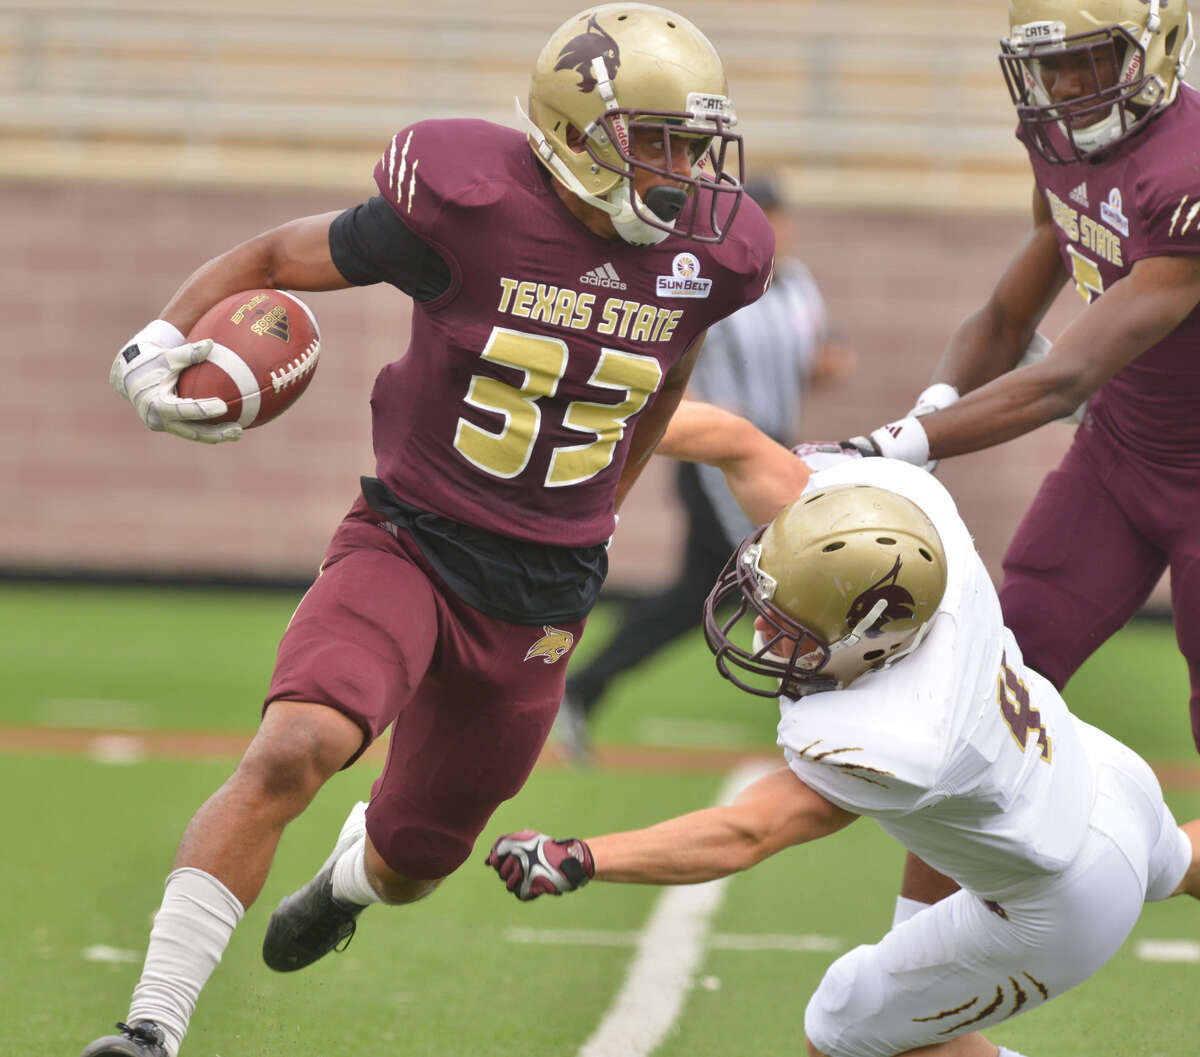 Texas State's David Farris breaks a tackle attempt by Grant Reber on a kickoff return during the annual Maroon and Gold spring game at Bobcat Stadium on Saturday.